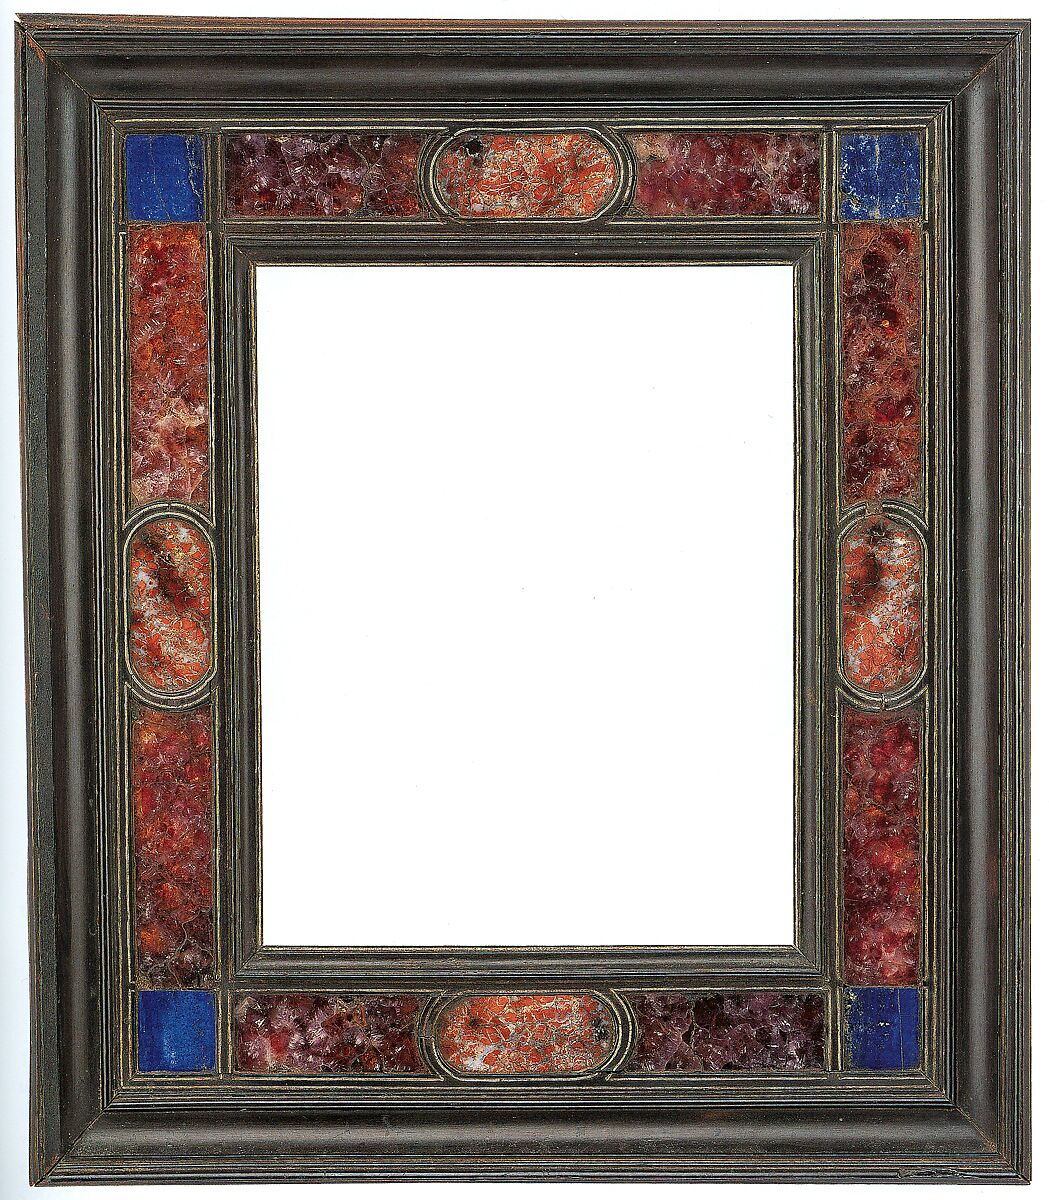 Cassetta frame, Unknown  , working in Rome, Poplar back frame with applied upper moldings in walnut, ebony, and ebonized pearwood.  Half-lapped back frame.  Niello; crystal and lapis lazulipanels with silver leaf beneath; some with dragon's-blood glaze.  Frieze: niello-bordered panels with radius-ended centers and square corners., Italian, Rome 